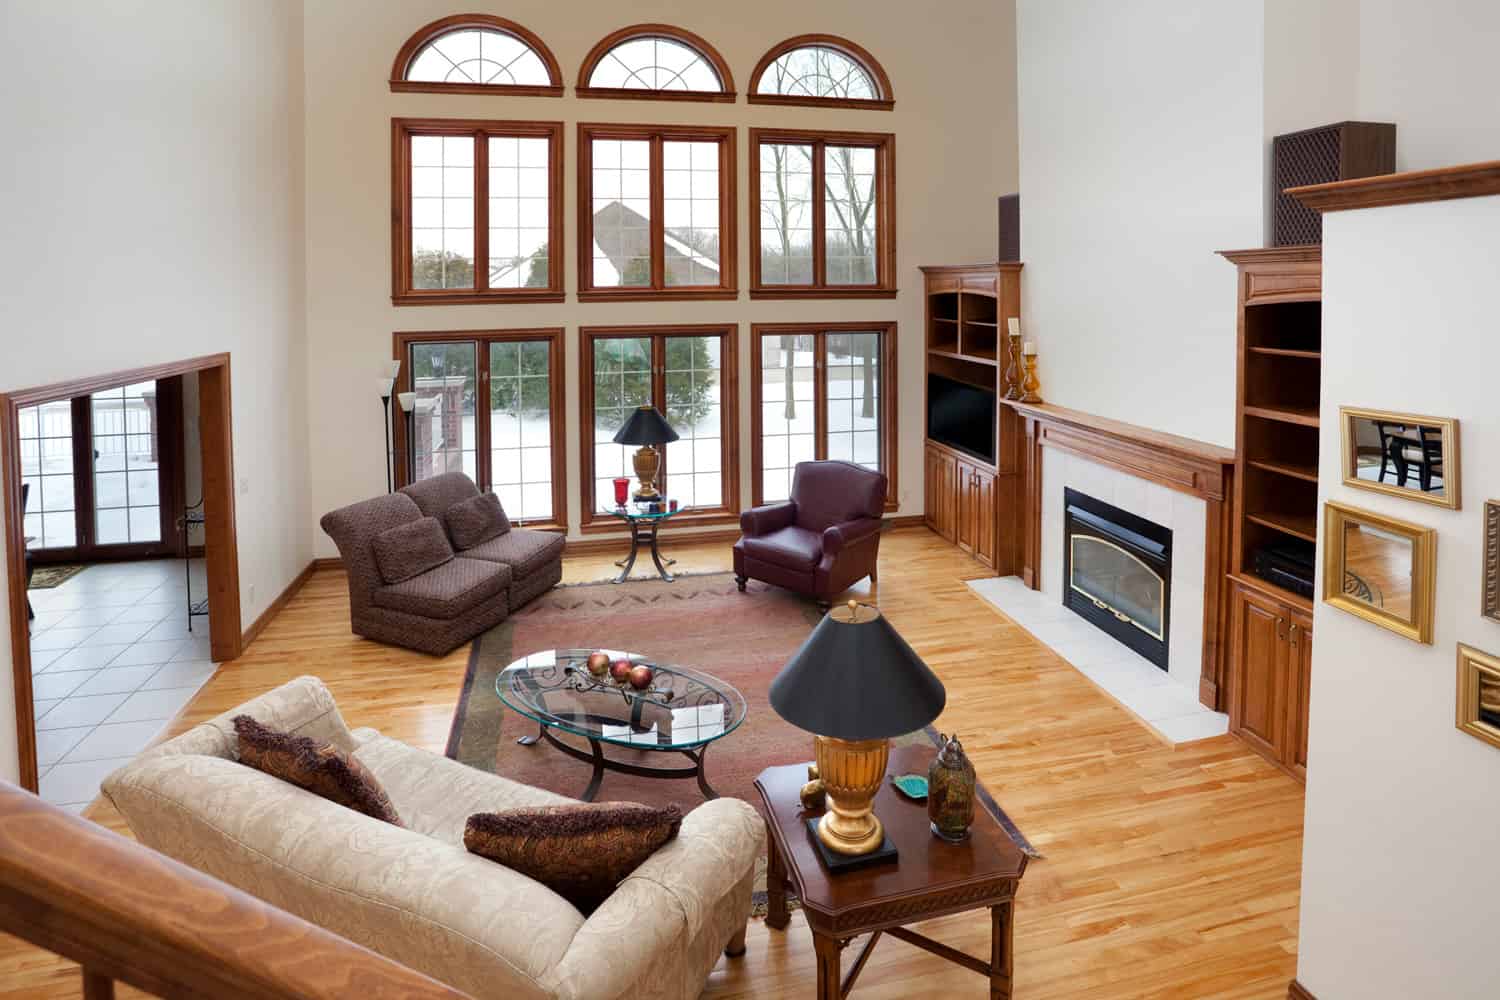 Spacious Great Room With Two Story Windows. This image also has a great space for ad copy at upper left.